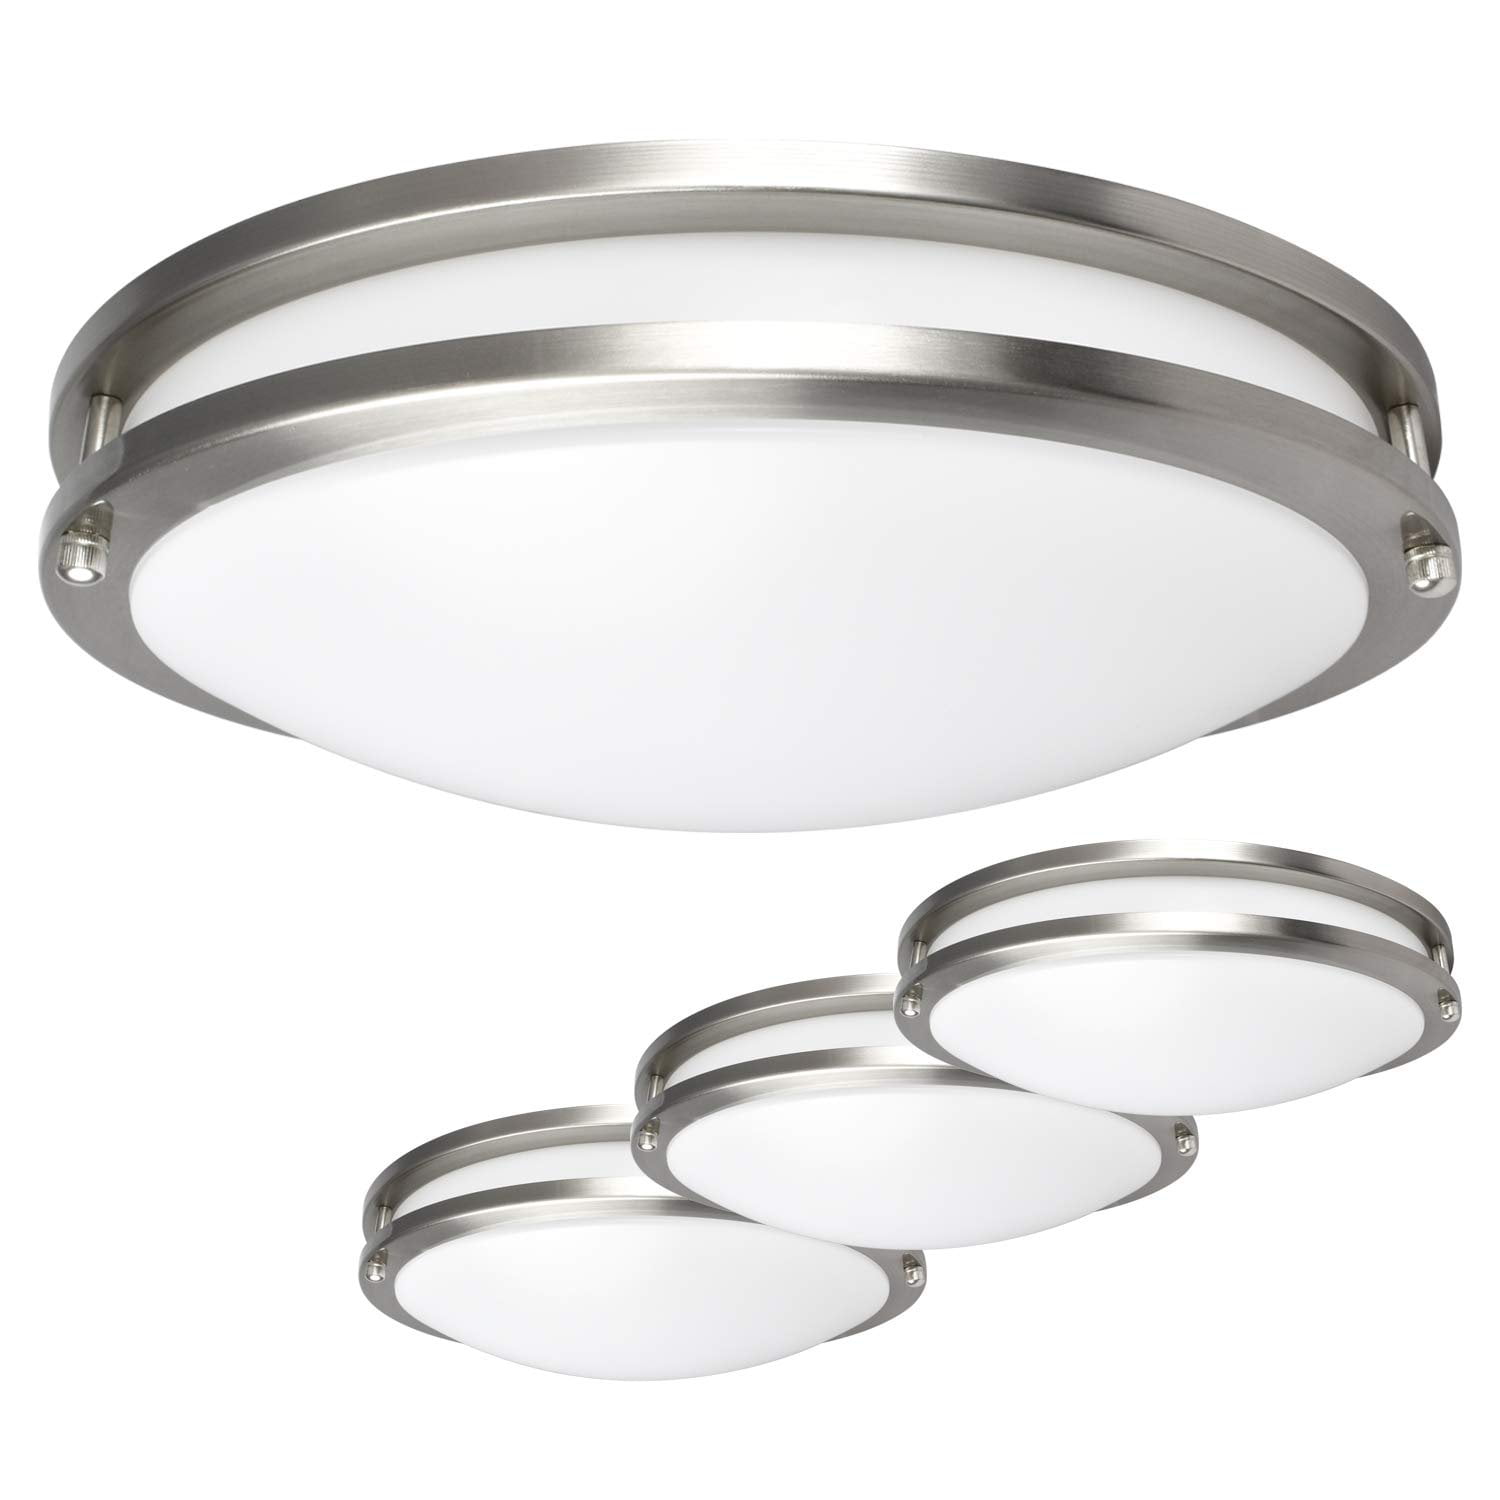 Luxrite LED Flush Mount Ceiling Light, 14 Inch, Dimmable ...